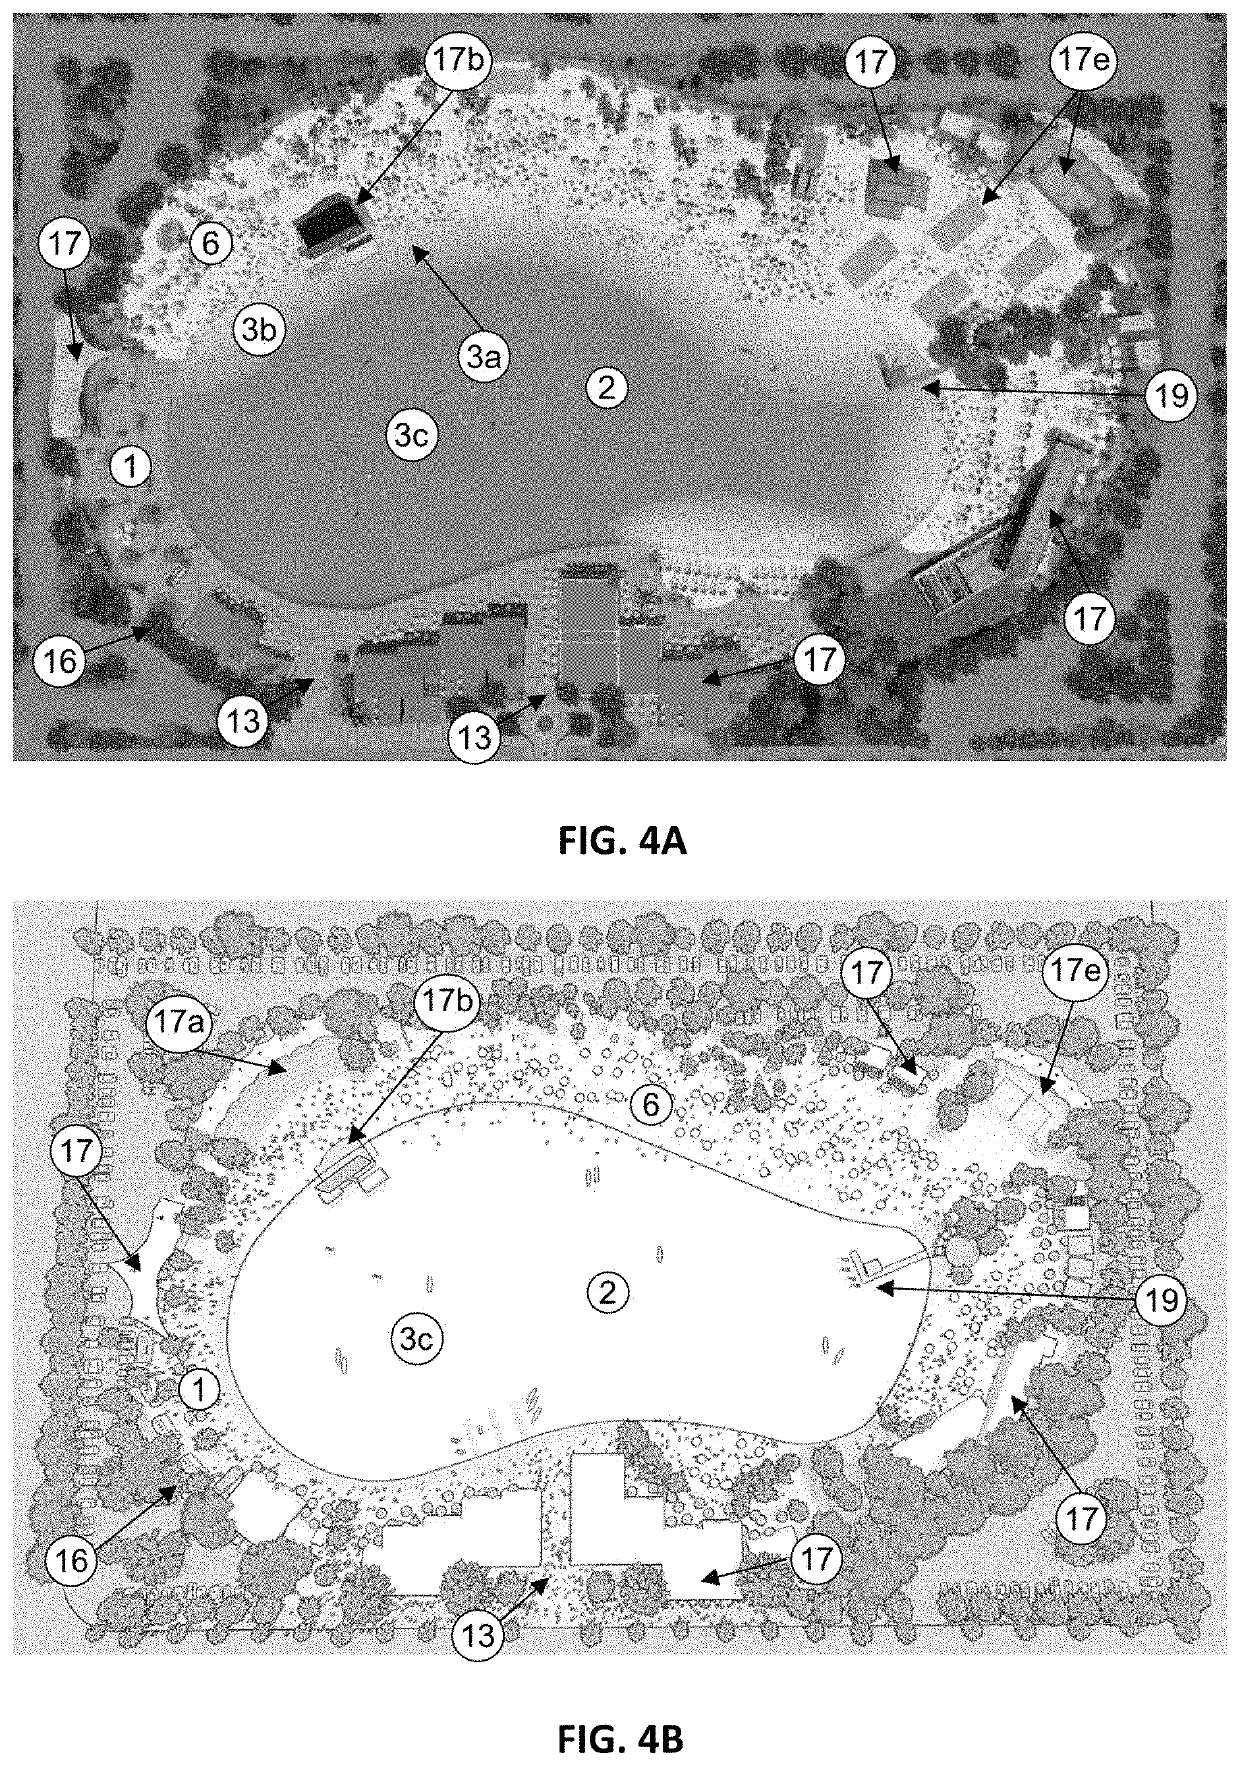 Publicly accessible urban beach entertainment complex with a centerpiece man-made tropical-style lagoon and method for providing efficient utilization of limited use land